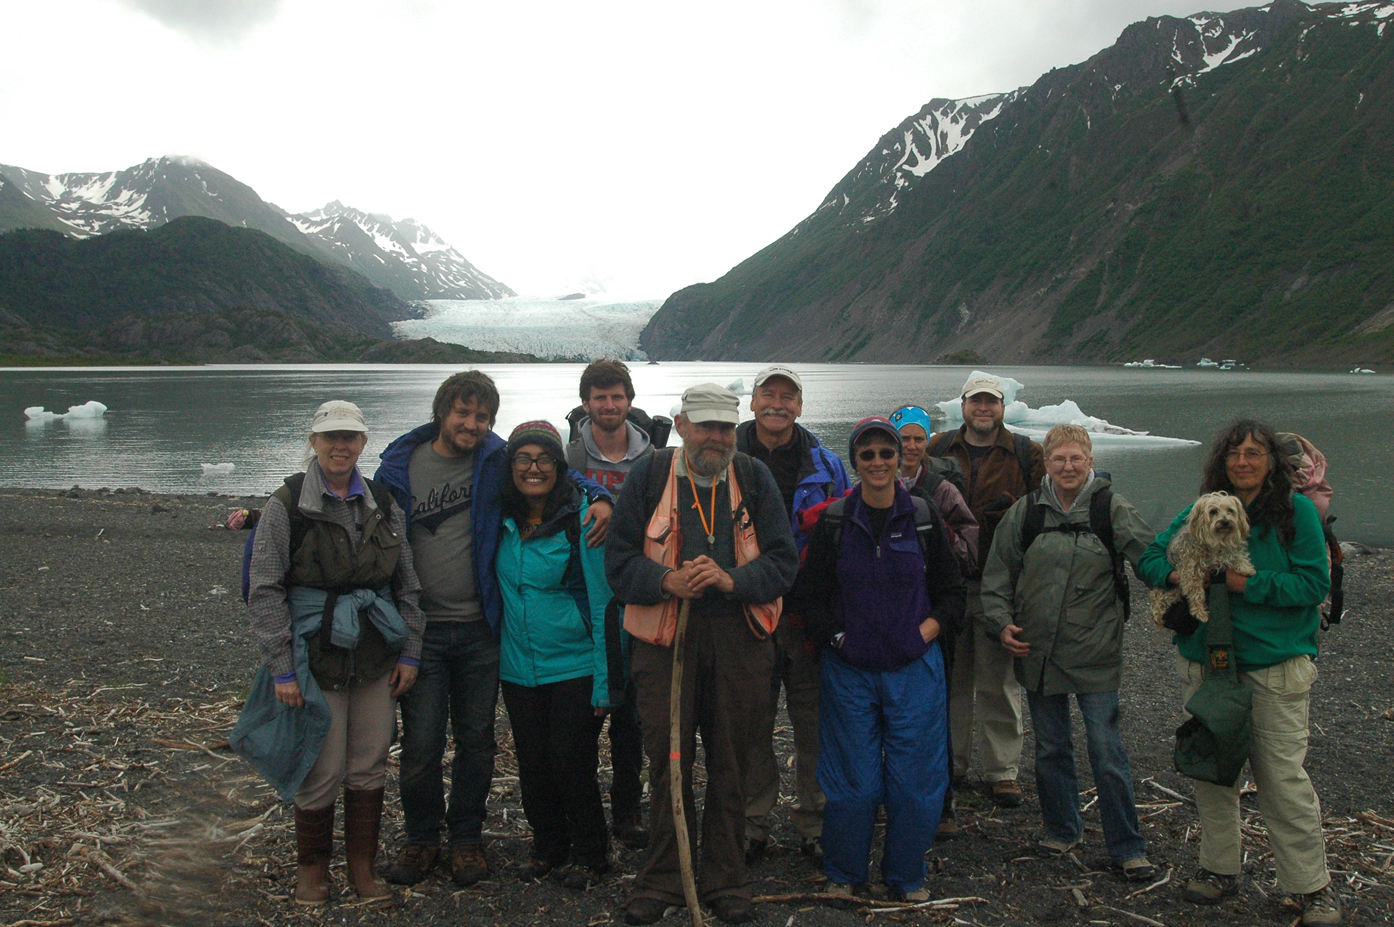 Volunteers pause in front of Grewingk Glacier Lake during the annual Trails Day on Saturday. Ed Berg, geology instructor at Kachemak Bay Campus (center wearing orange vest), led the family hike. From left are Nancy Larsen, Jeremy Sitarek, Melanie Prasad, Pryce Ragains, Berg, Don Reed, Holly Van Pelt, Michelle Waclawski, Phillip Waclawski, Diane Waclawski and Carol Sharat.-Photo by Shannon Reid